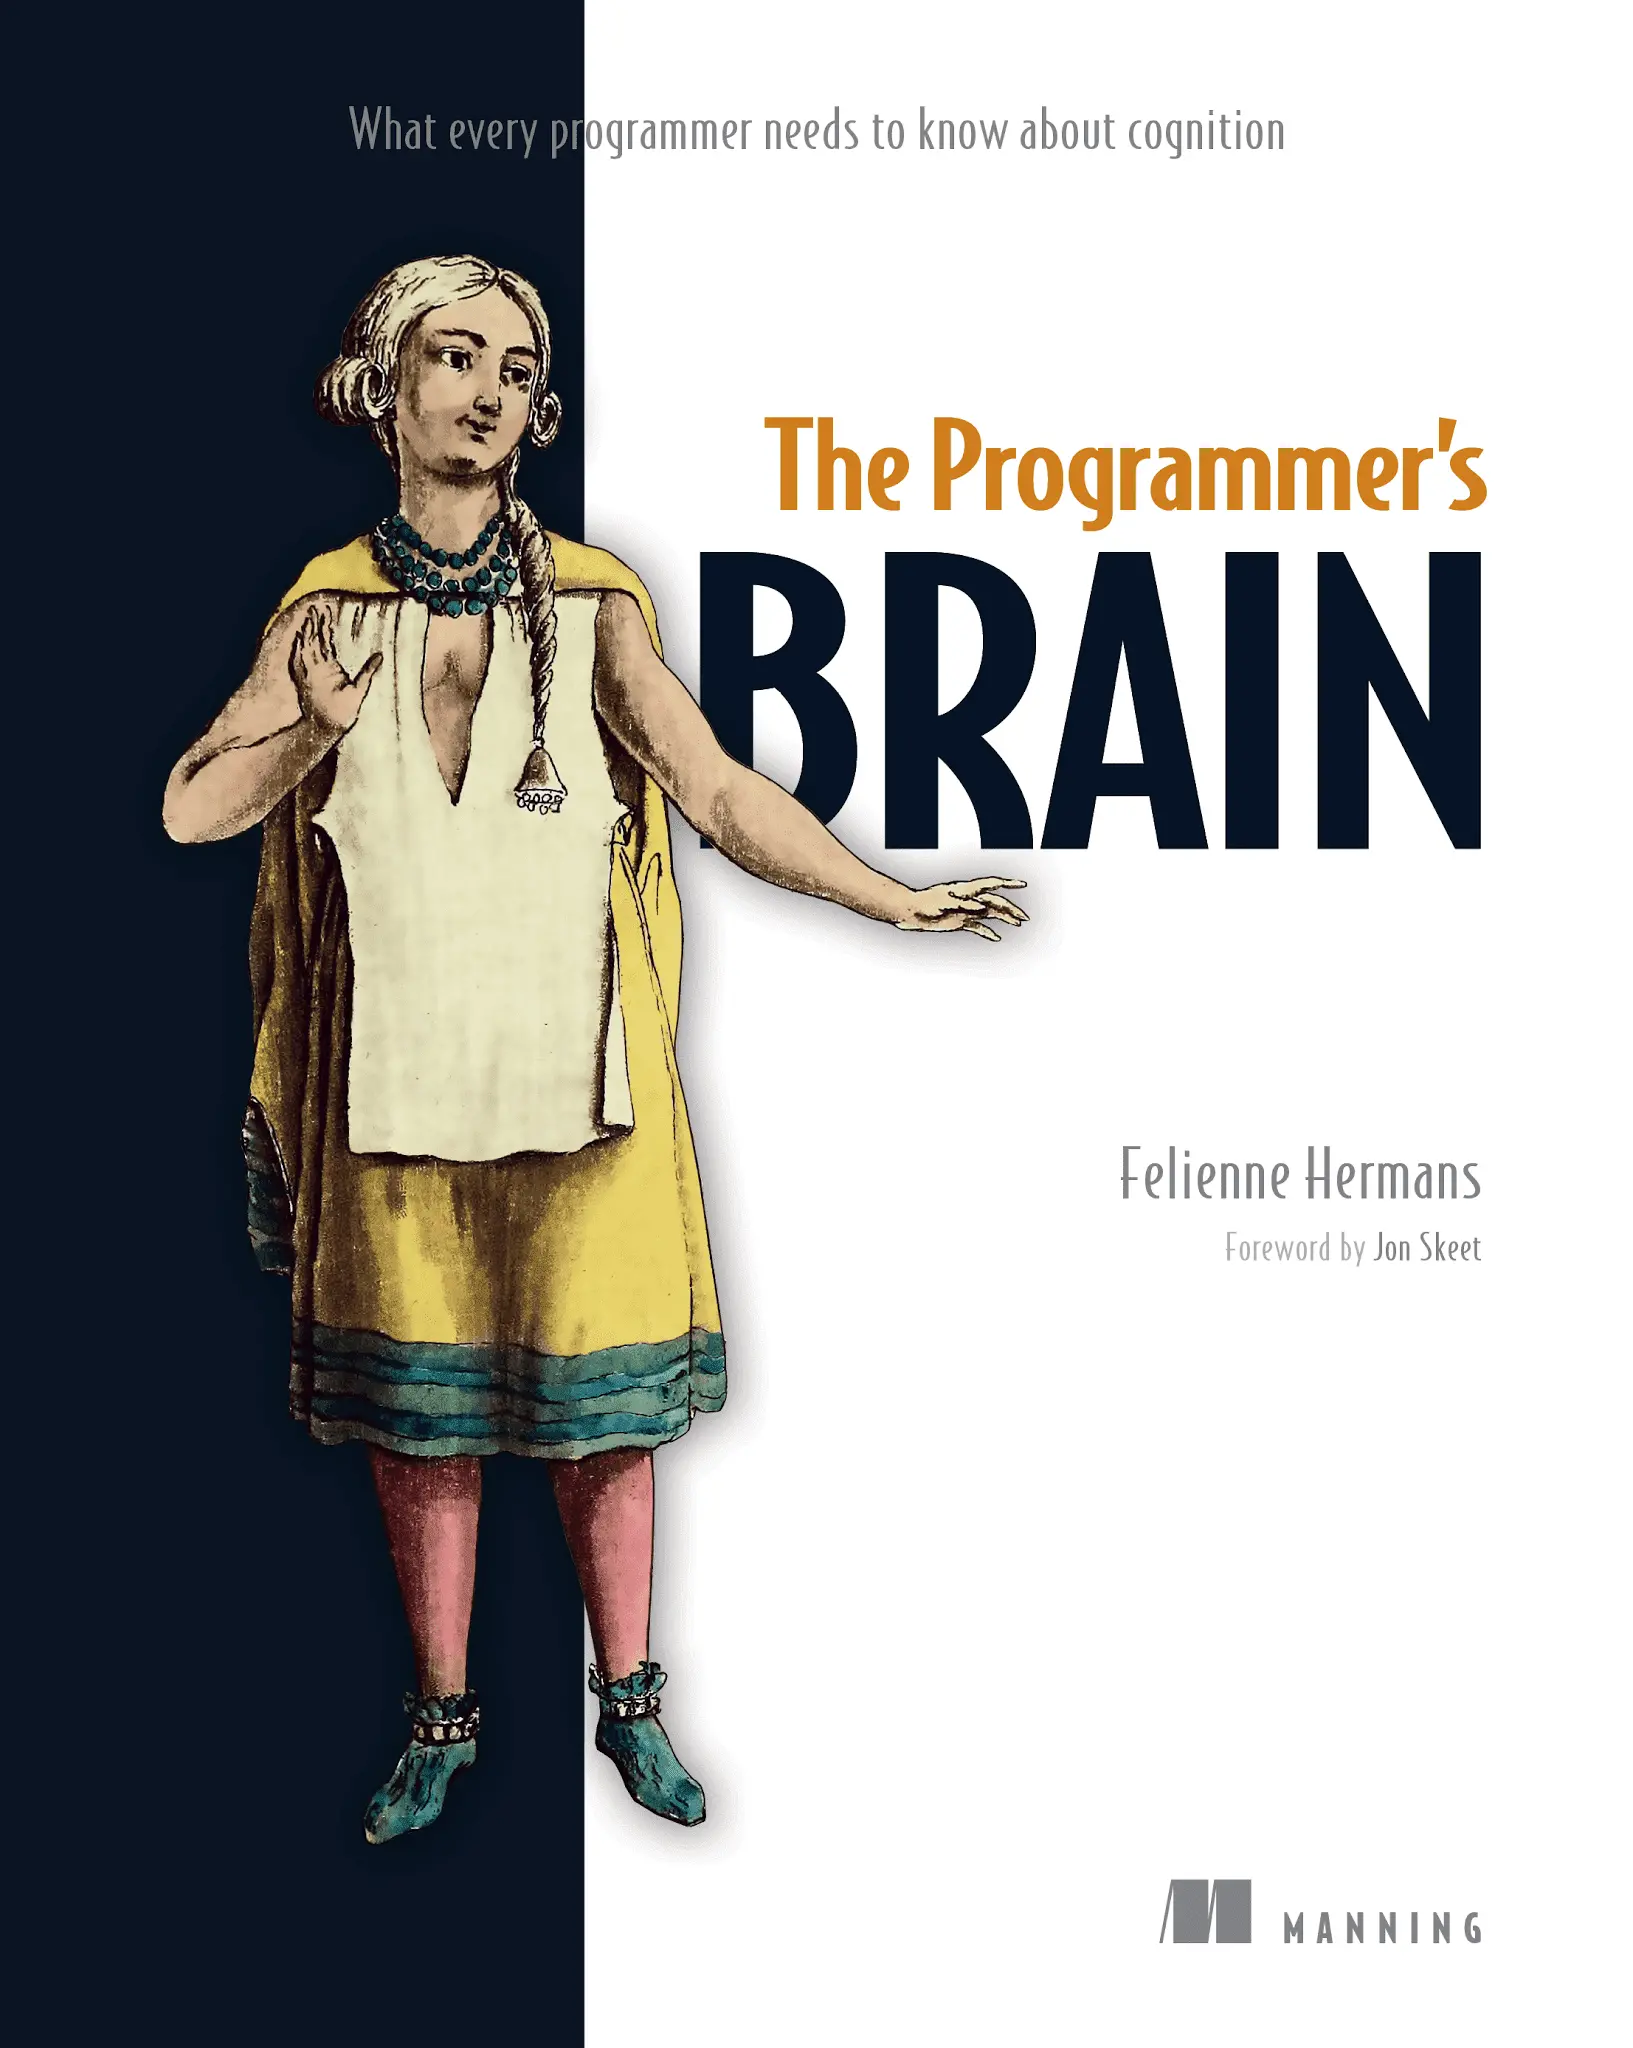 The Programmer's Brain by Felienne Hermans book cover